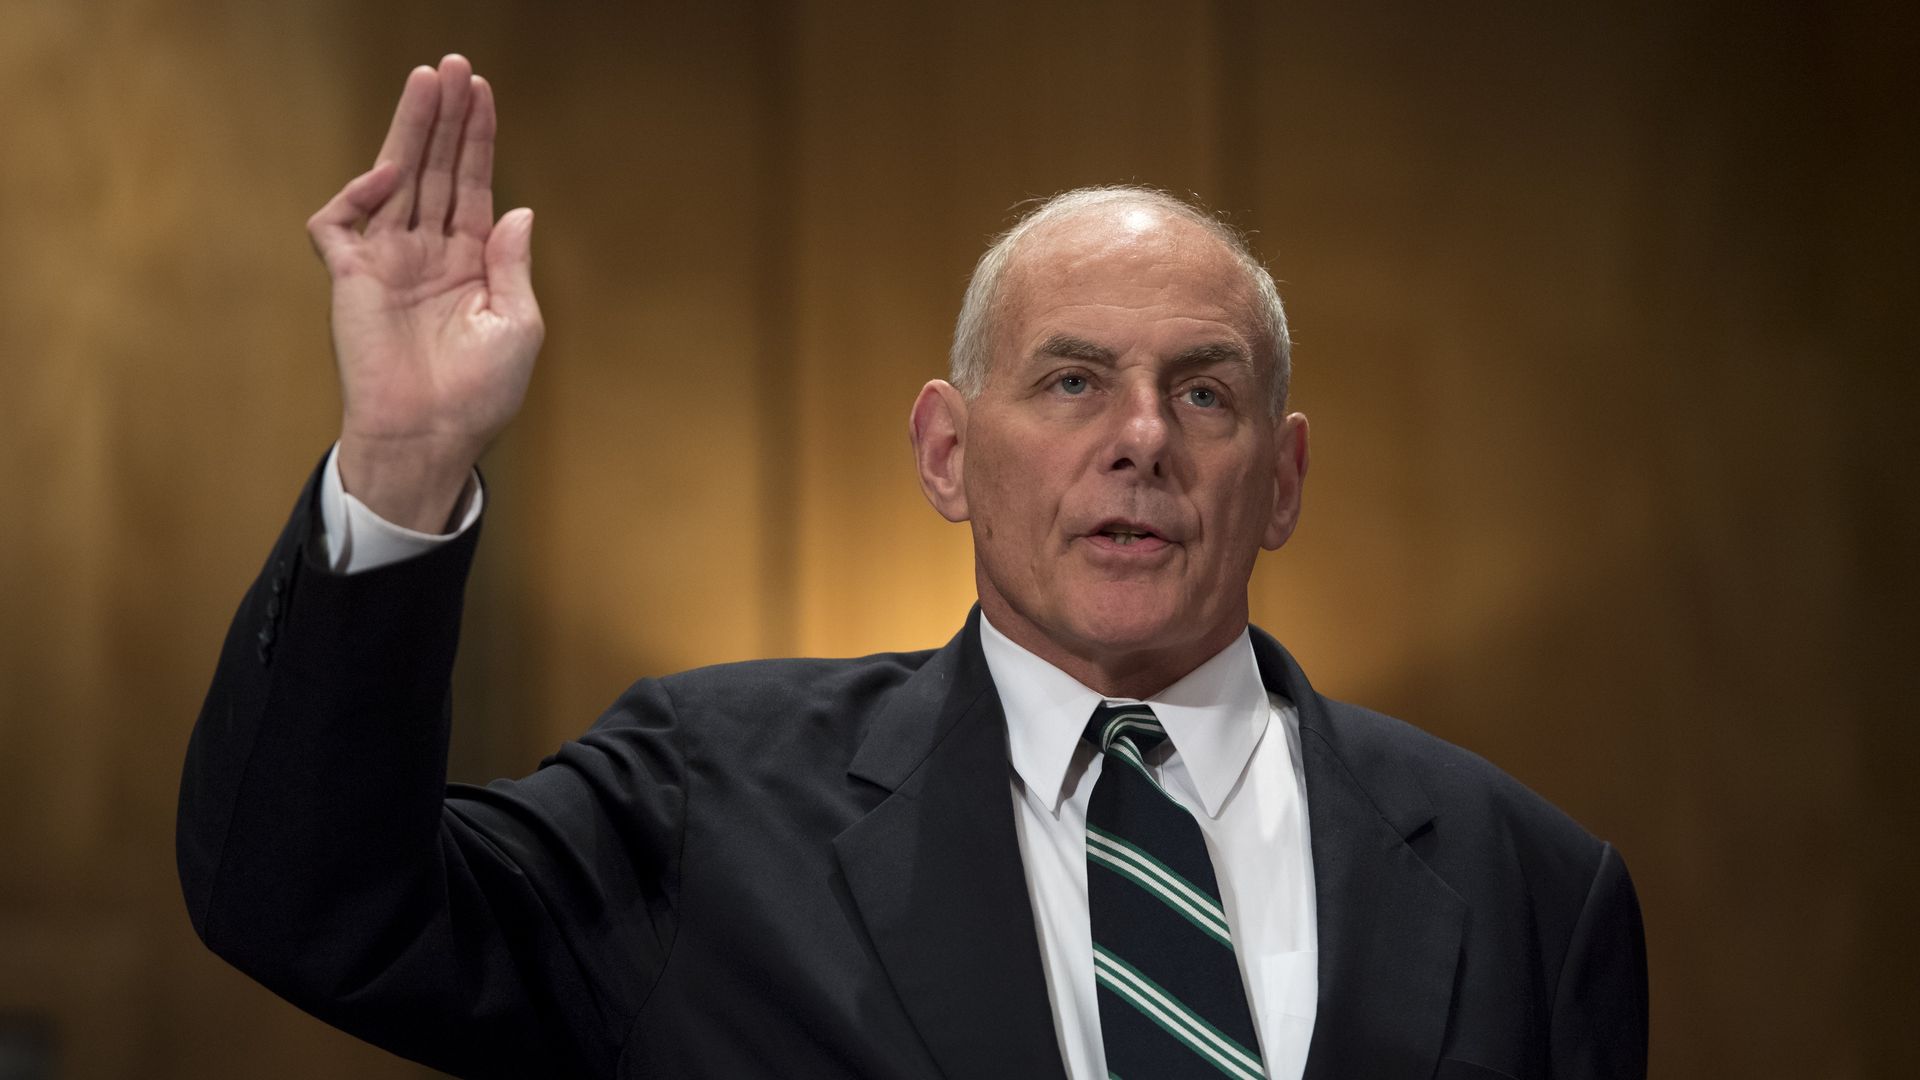 John Kelly discussed a variety of issues during an appearance at Duke University Wednesday.